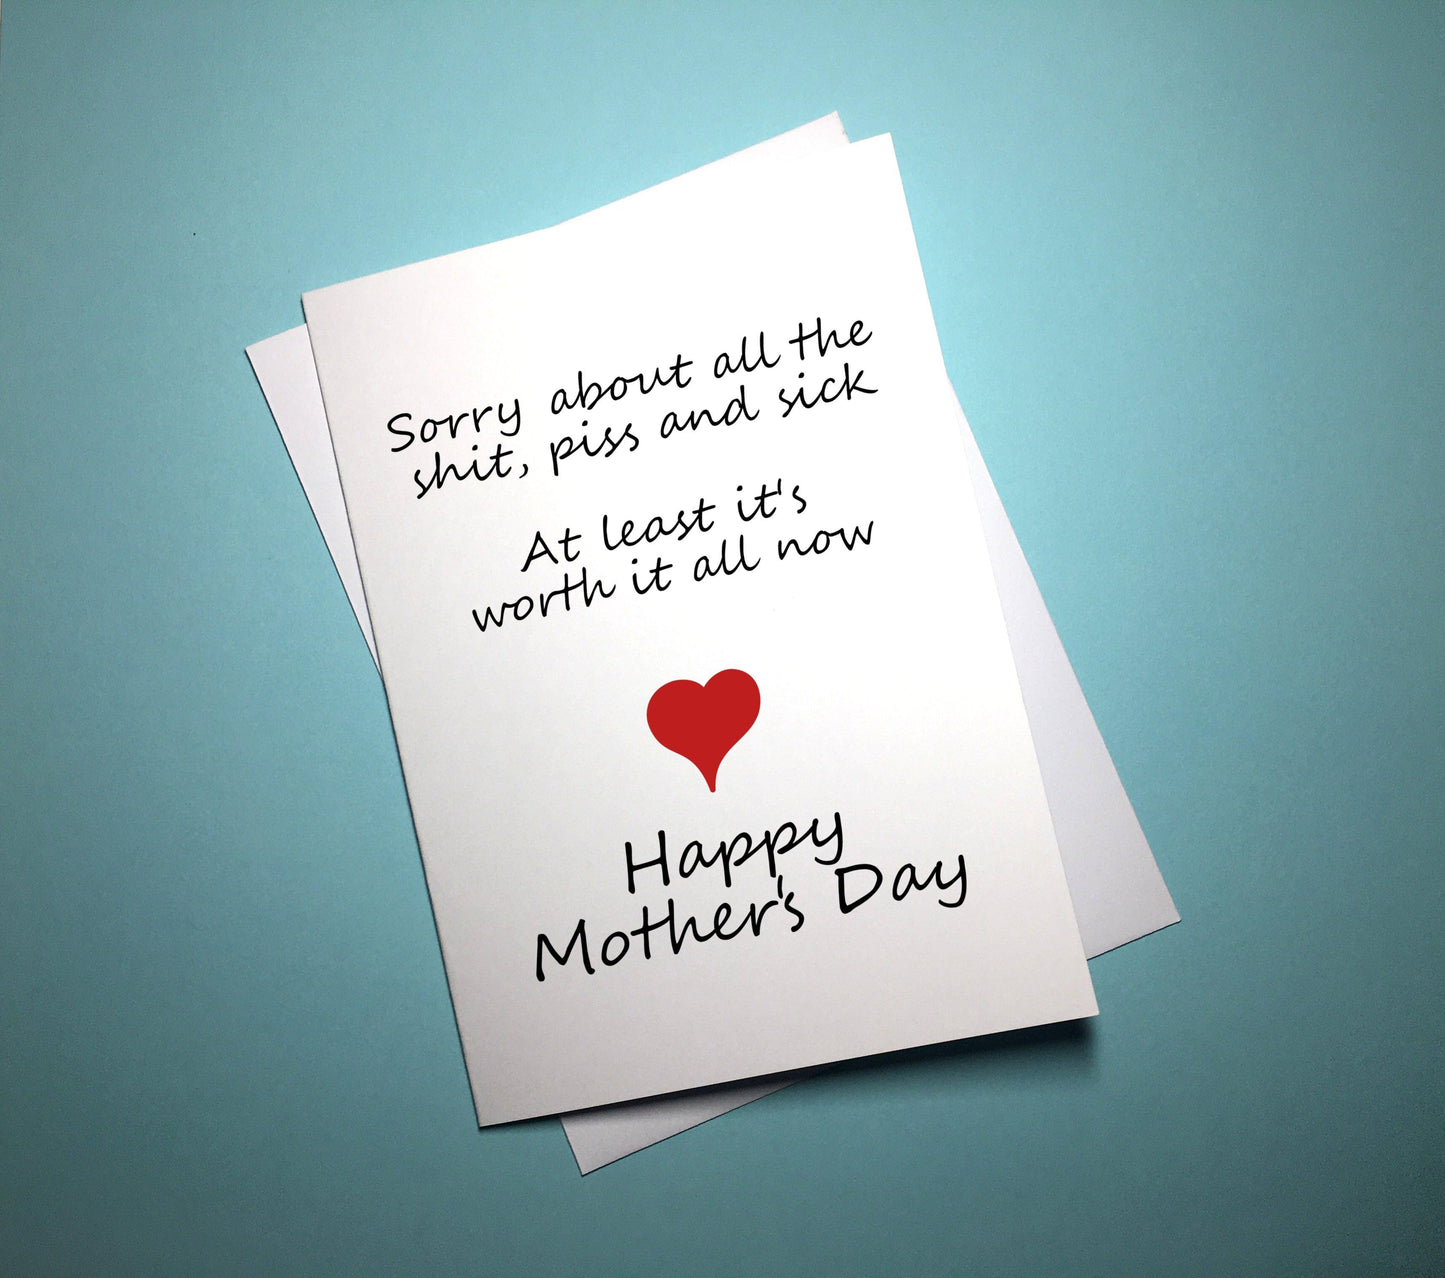 Mother's Day Card - All The Shit - Mr. Inappropriate 